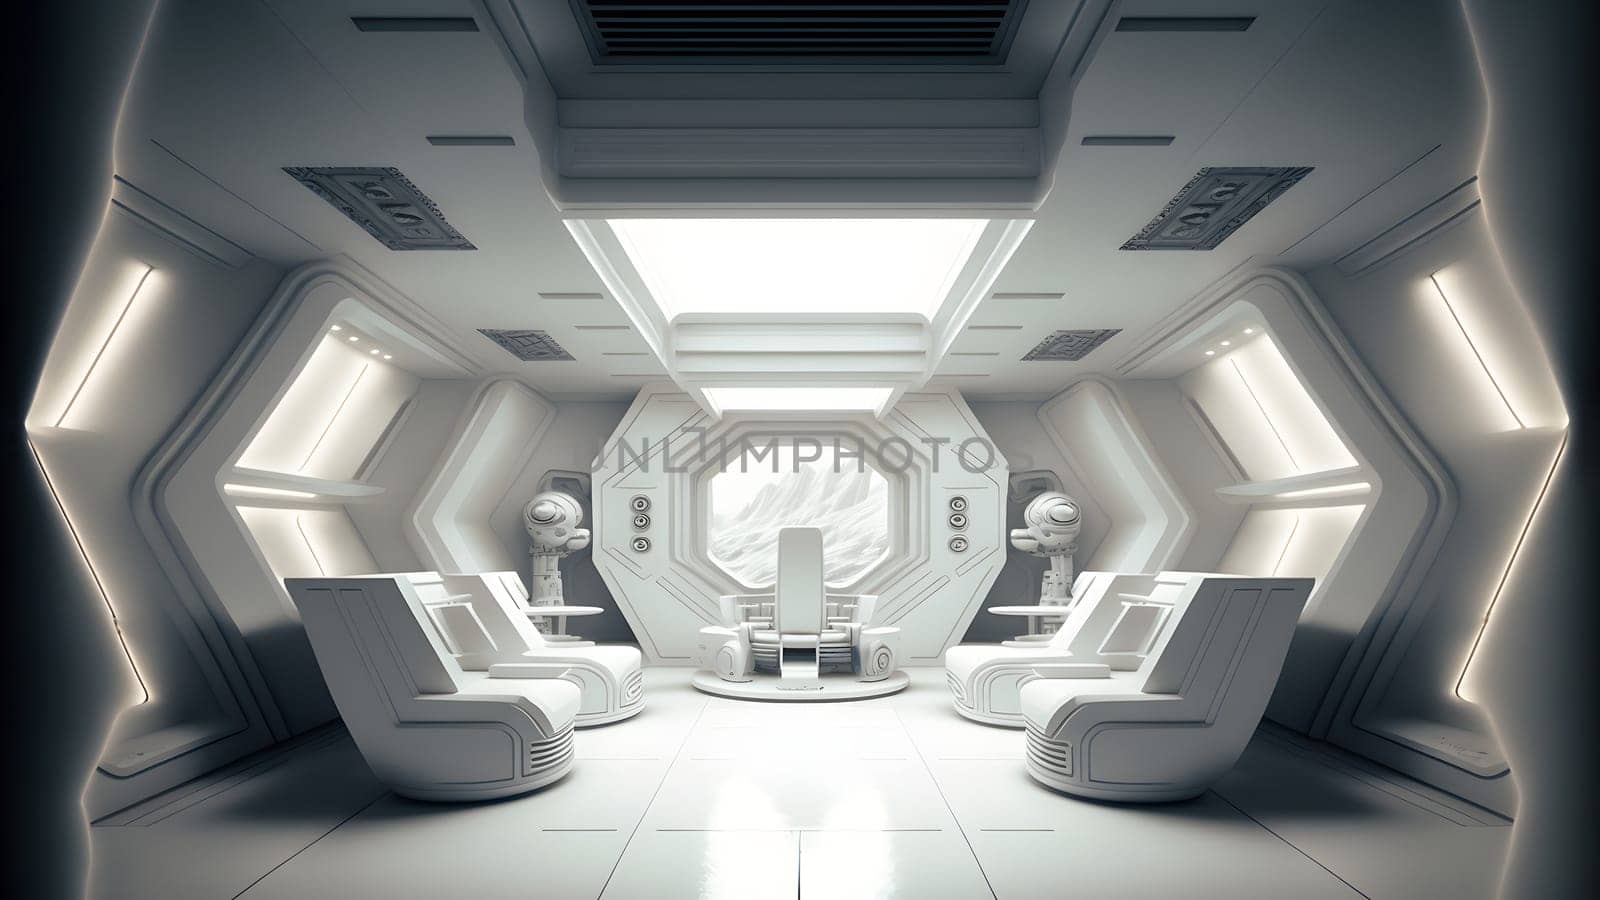 white interior of utopian futuristic moonbase, neural network generated art. Digitally generated image. Not based on any actual scene or pattern.